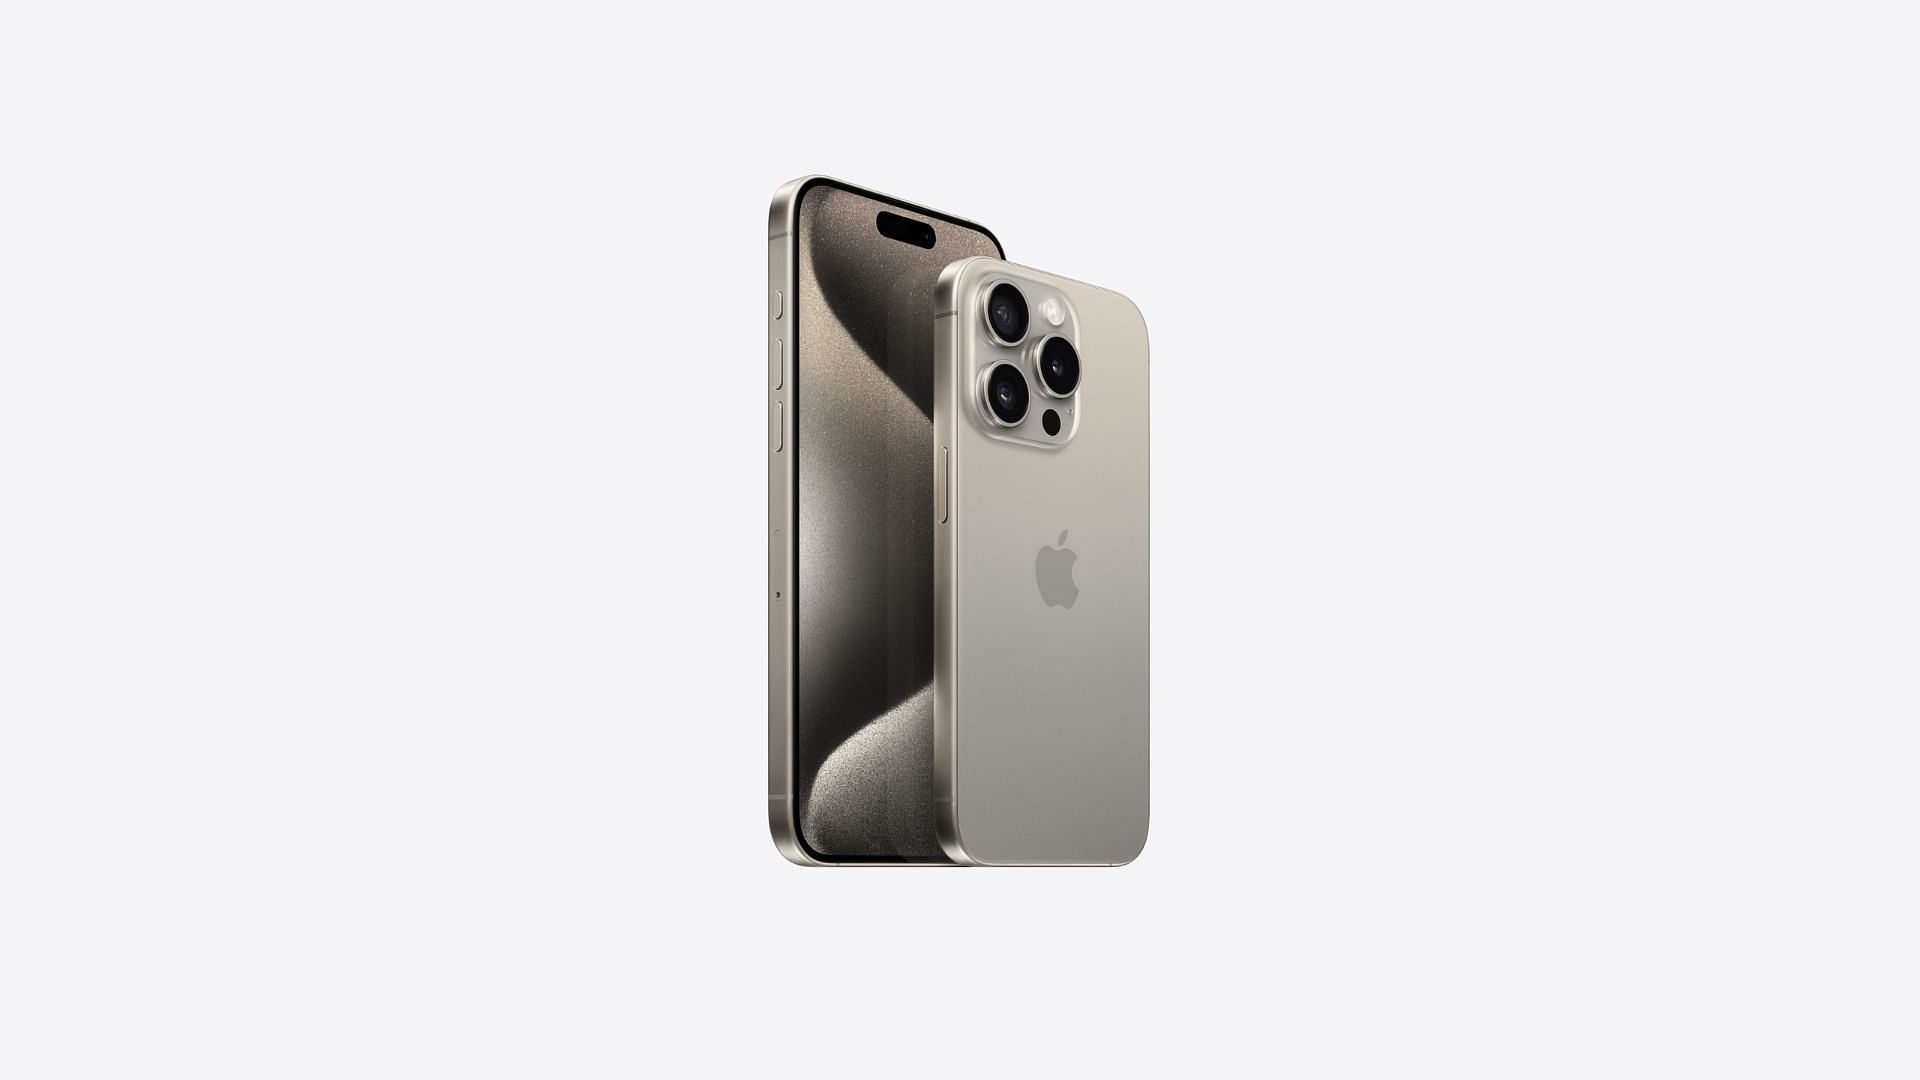 Experience high-quality visuals with Ray Tracing support on the iPhone. (Image via Apple)